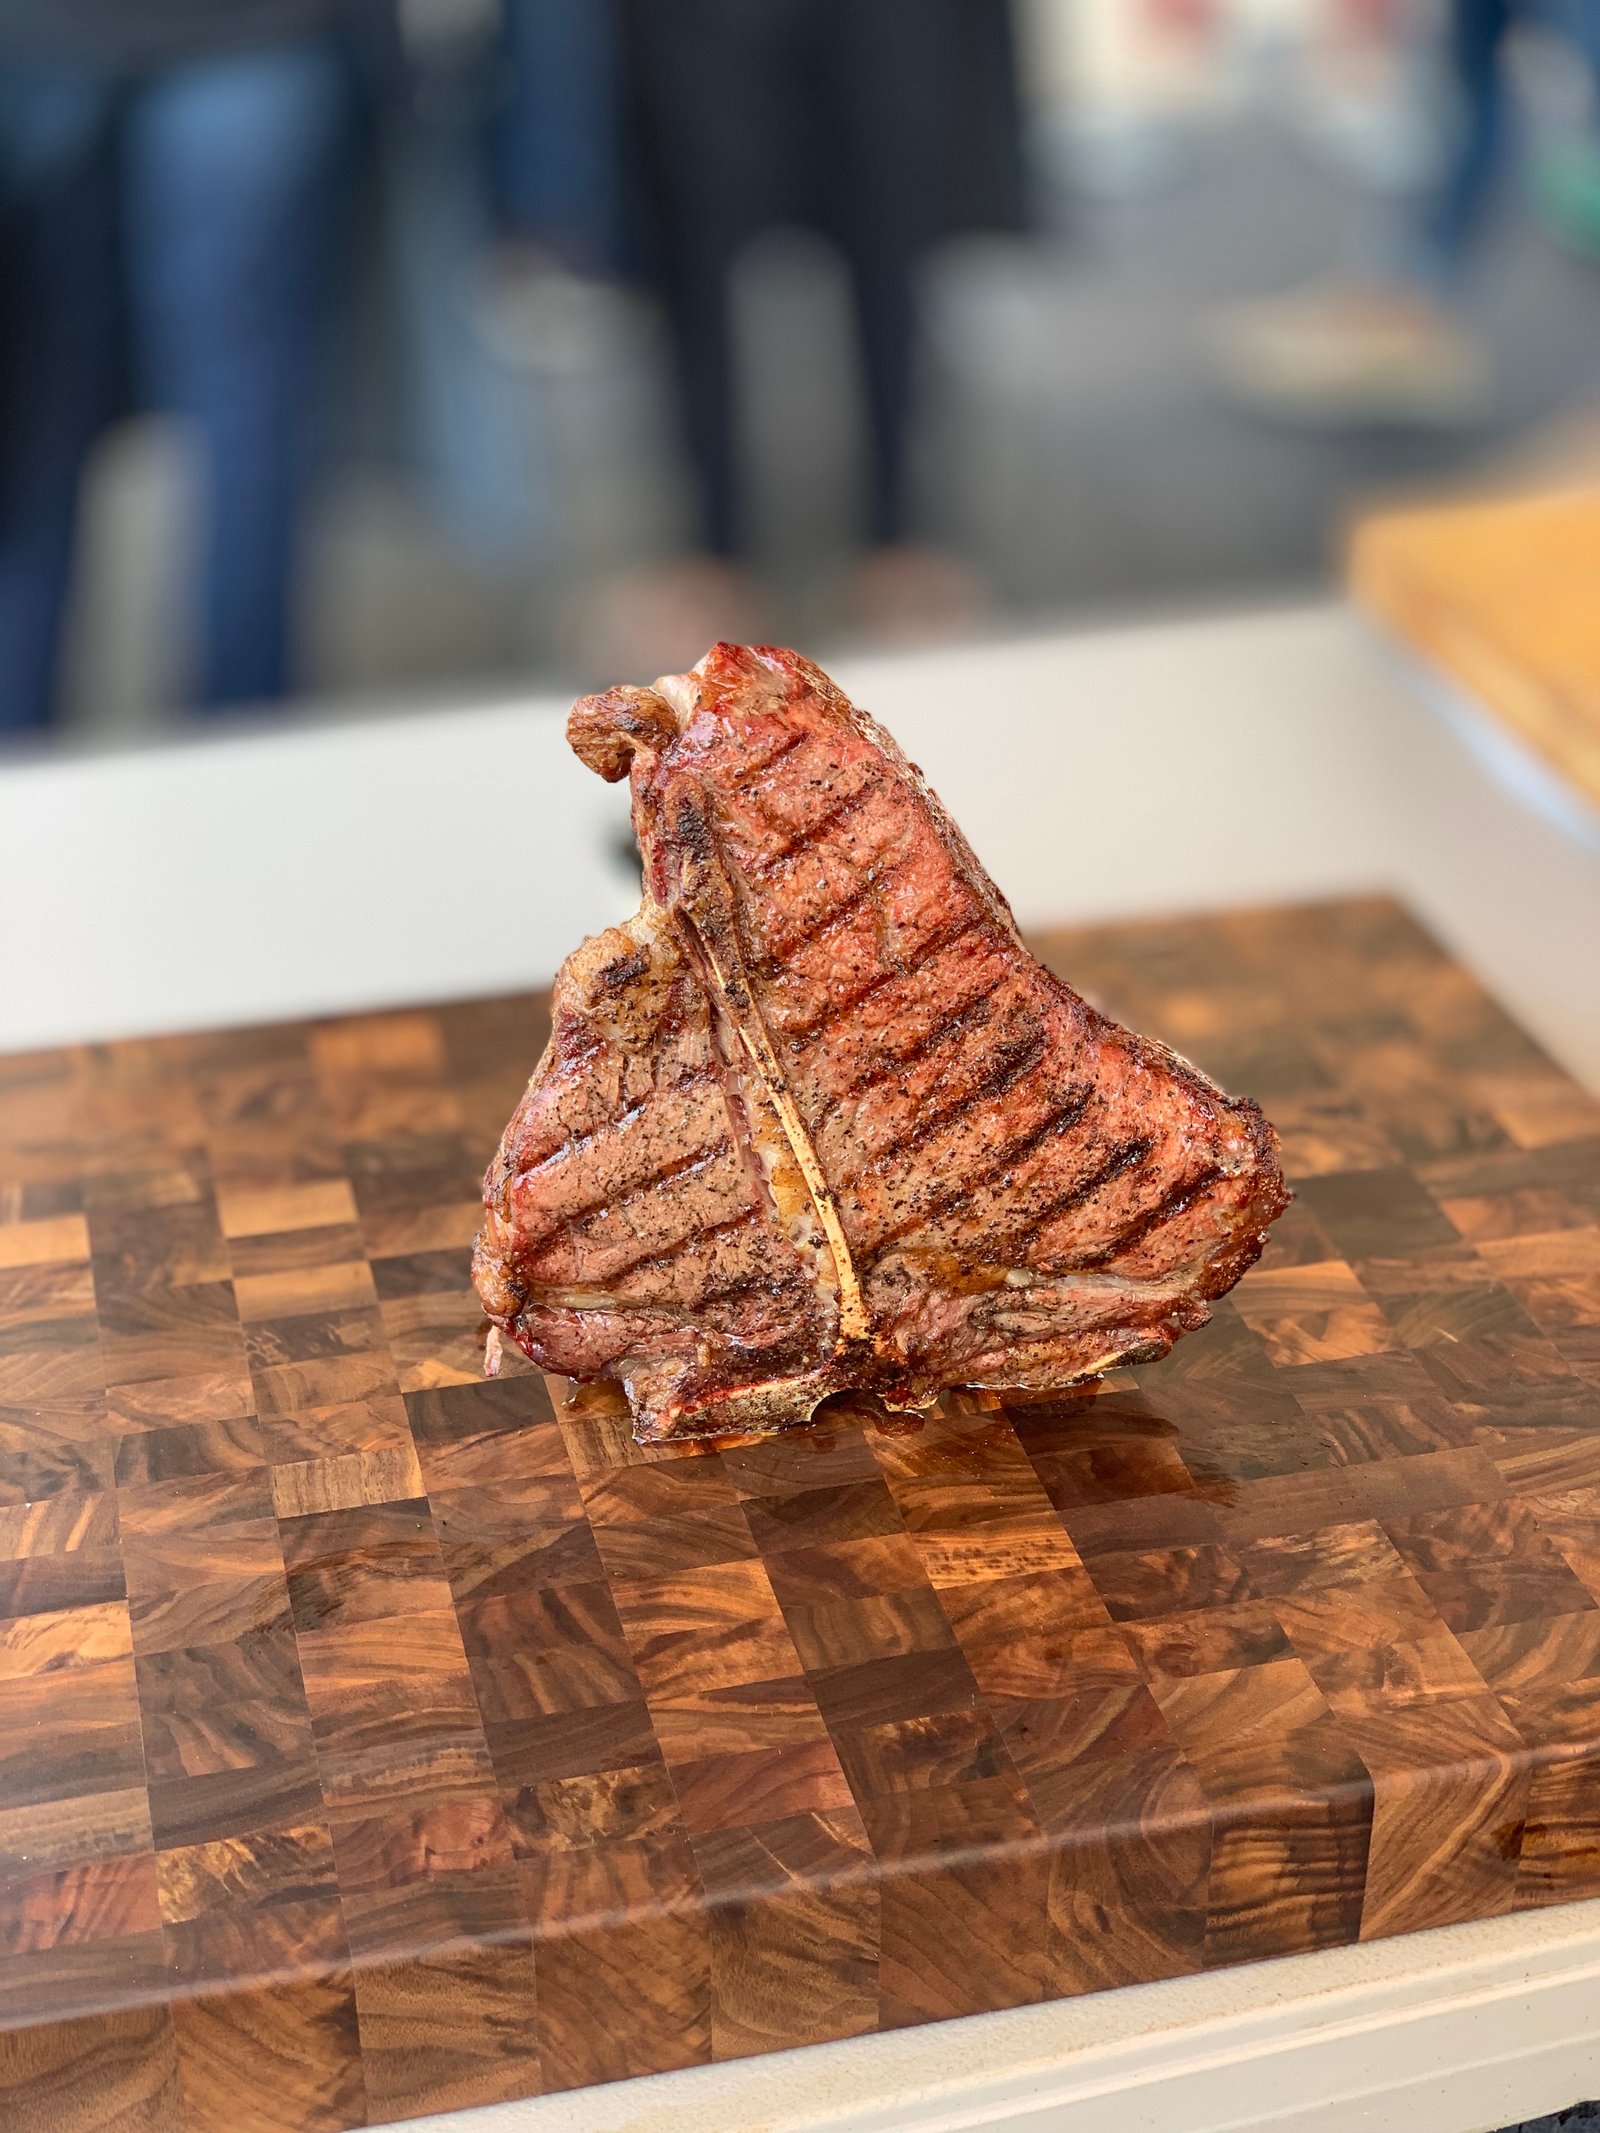 Certified Angus Beef ® brand – Day 2